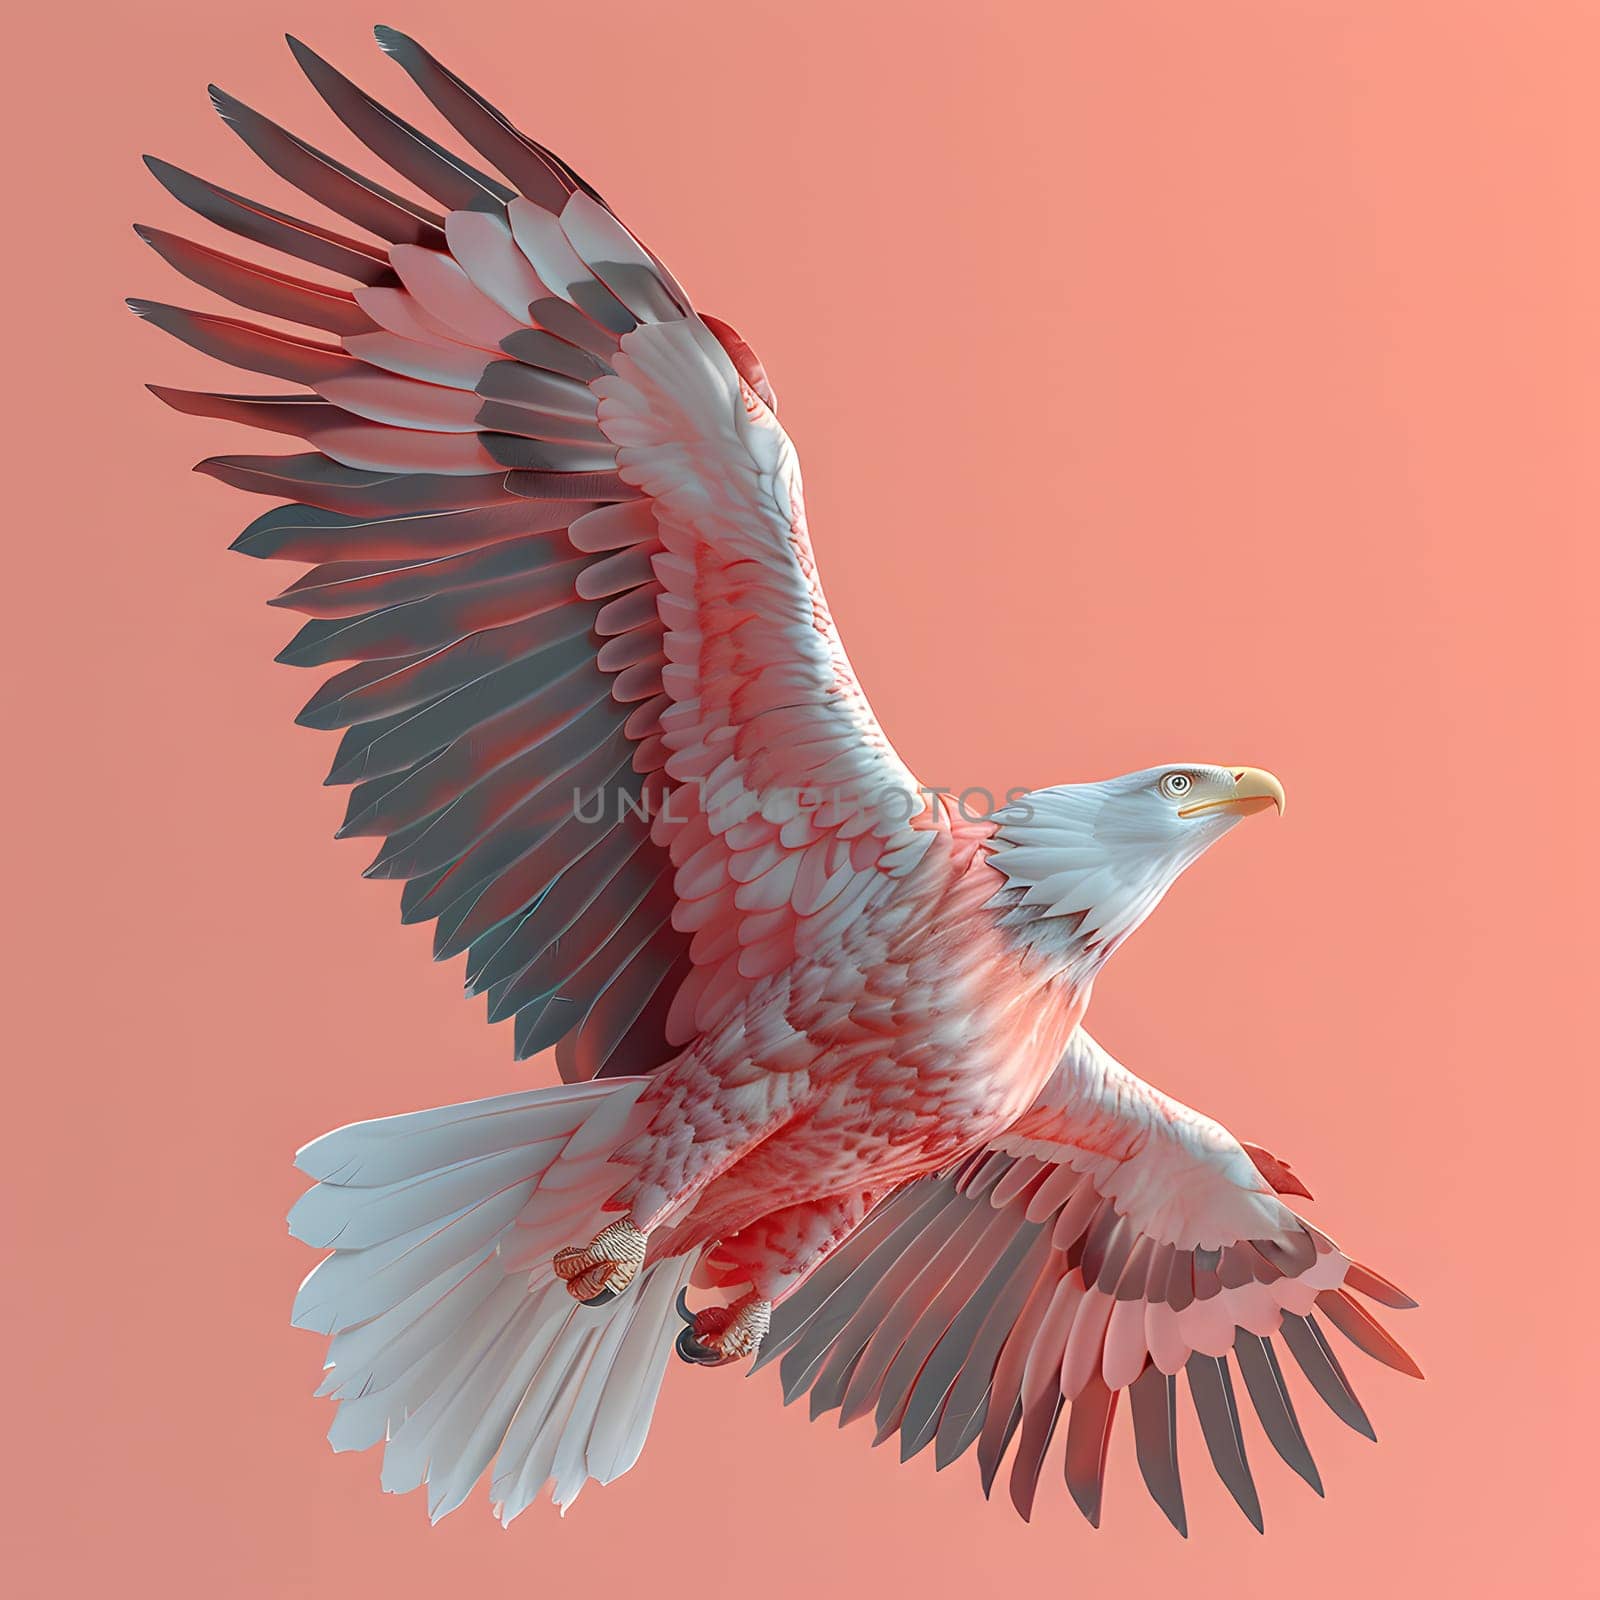 Bird of white and pink hues soars with wings spread by Nadtochiy